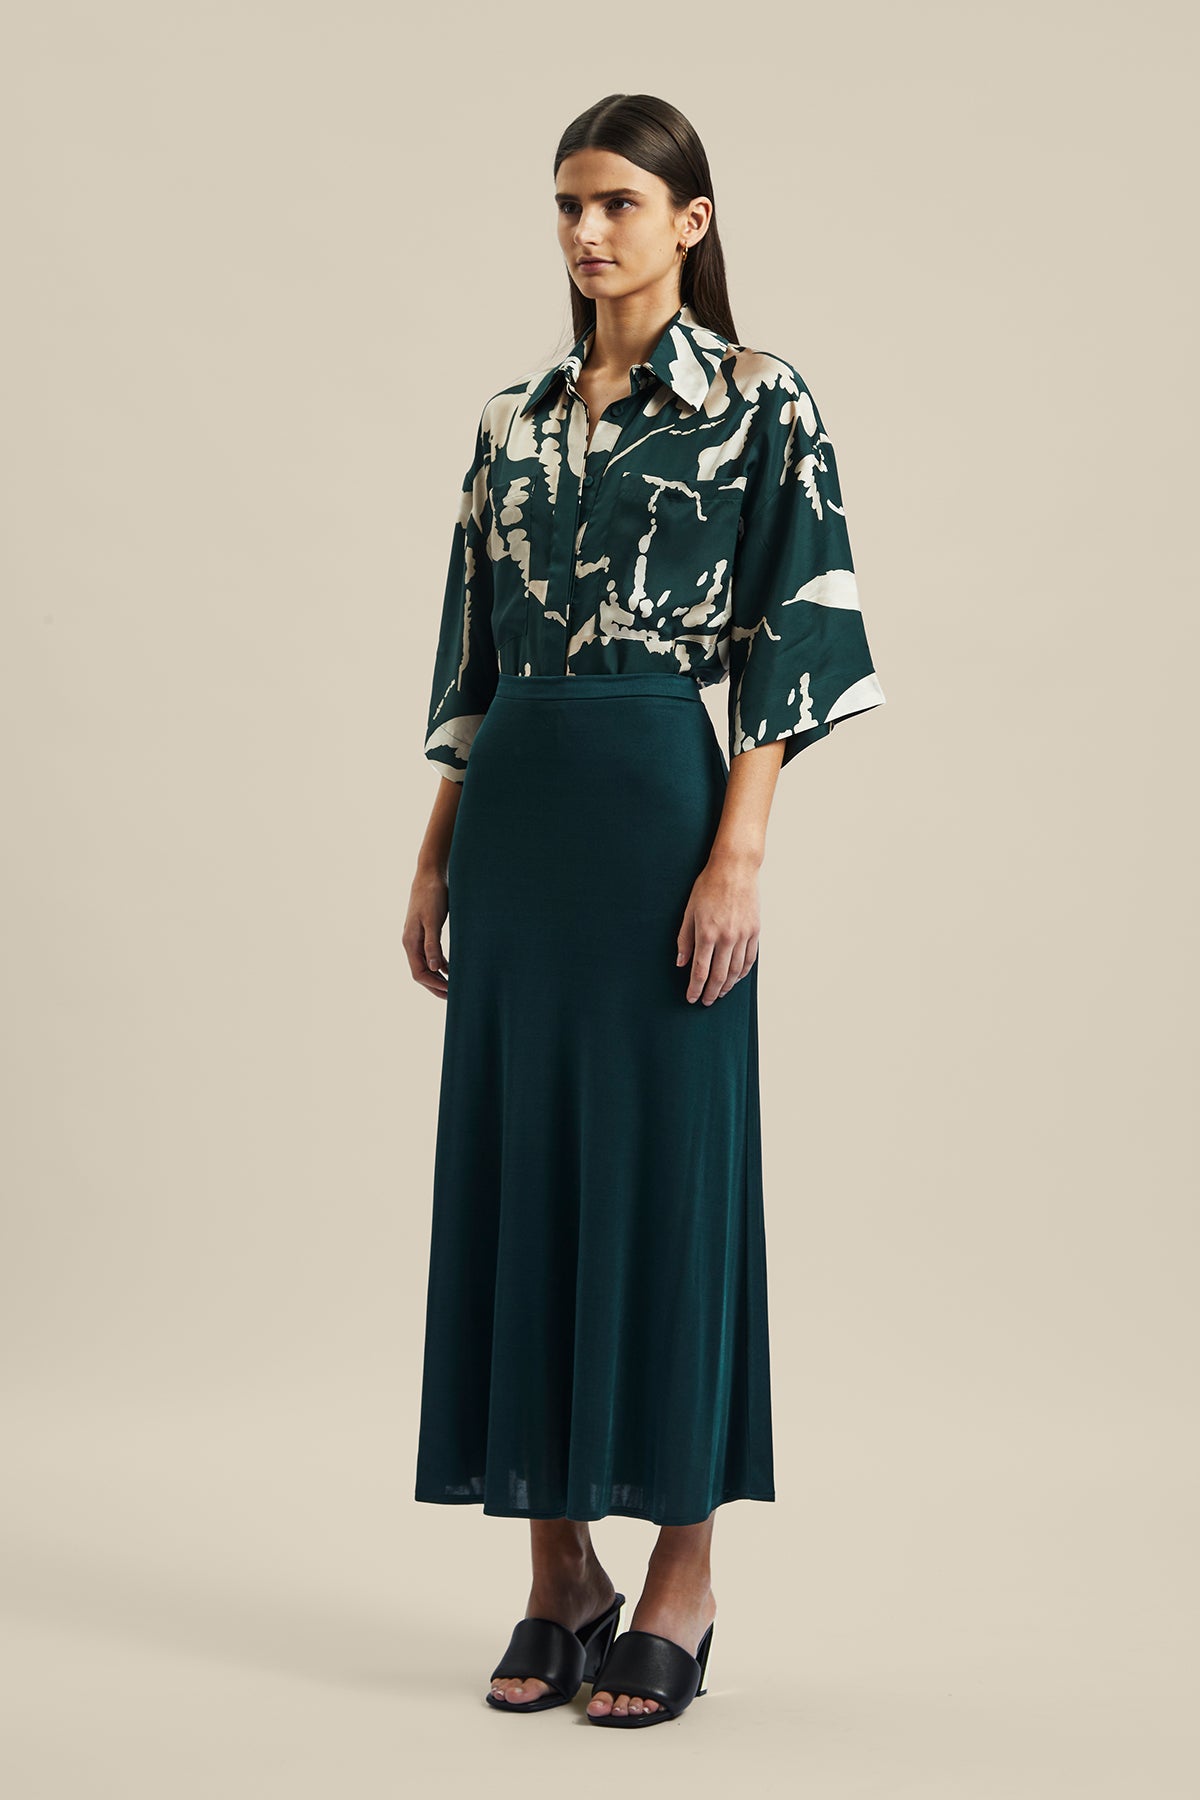 Model wearing the forest green silk Coalesce Skirt from Australian fashion designer Ginger & Smart. Worn with the Memoirs Blouse